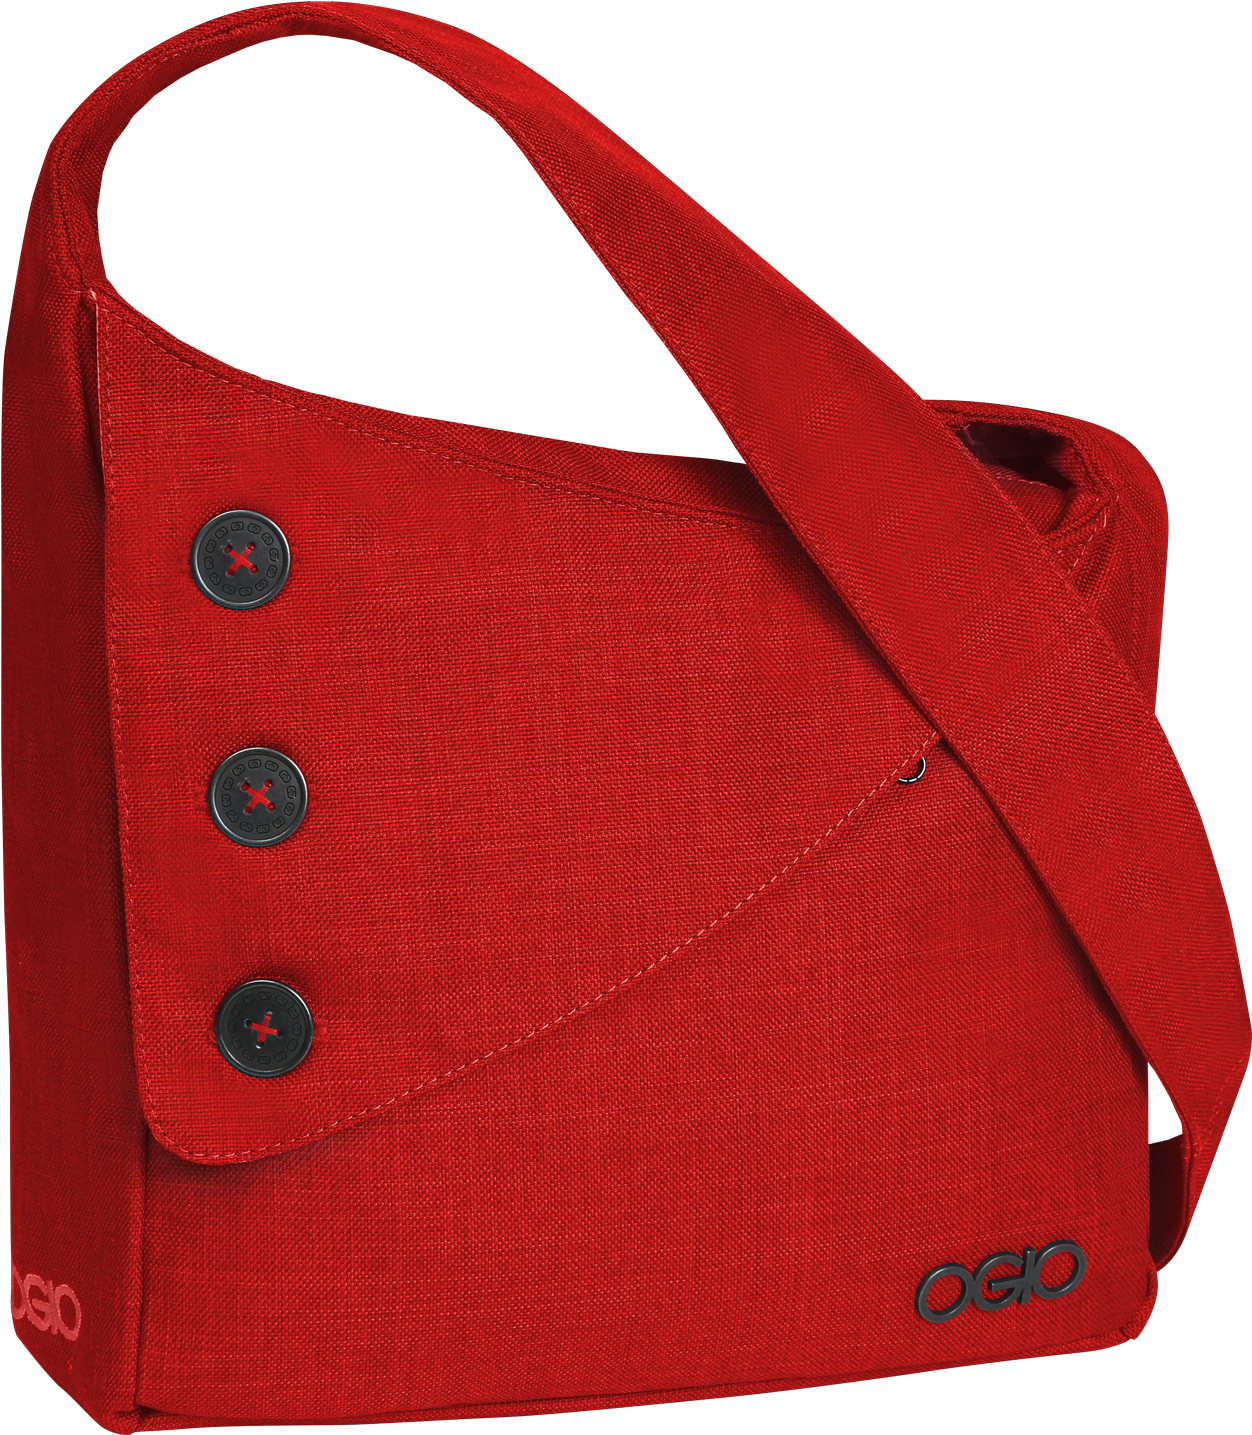 Red Women Bag Png Image - Ogio Brooklyn Women's Tablet Purse (1500x1500)